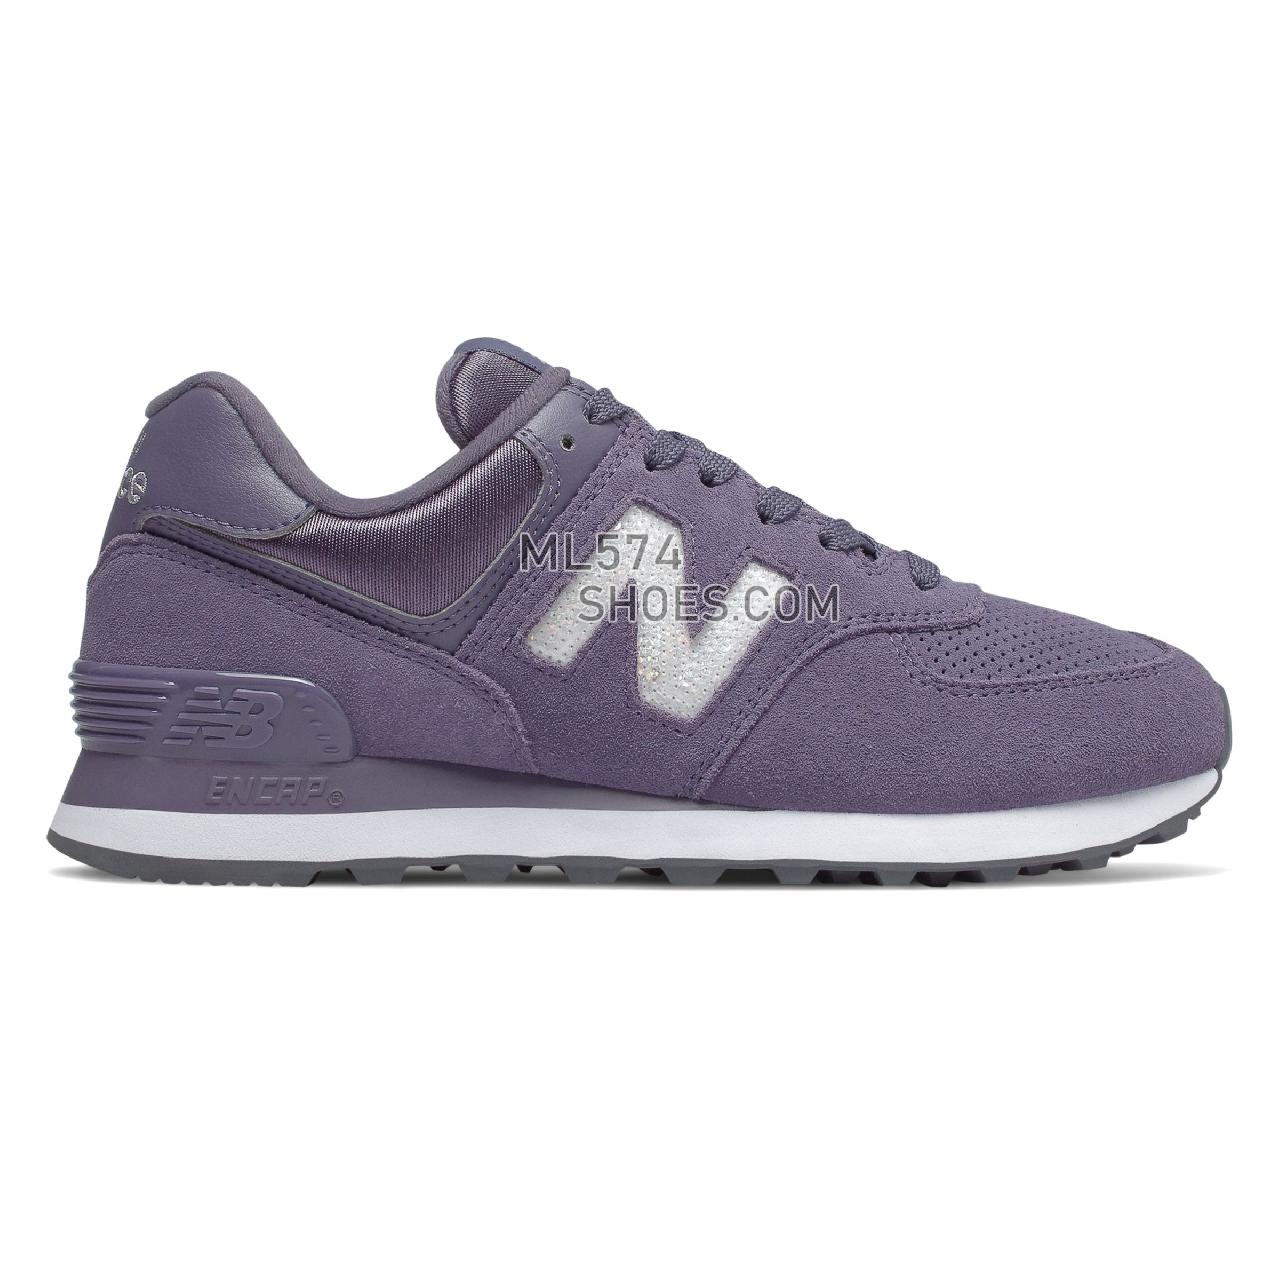 New Balance 574 Holiday Sparkler - Women's 574 - Classic Deep Cosmic Sky with Marblehead - WL574FHB